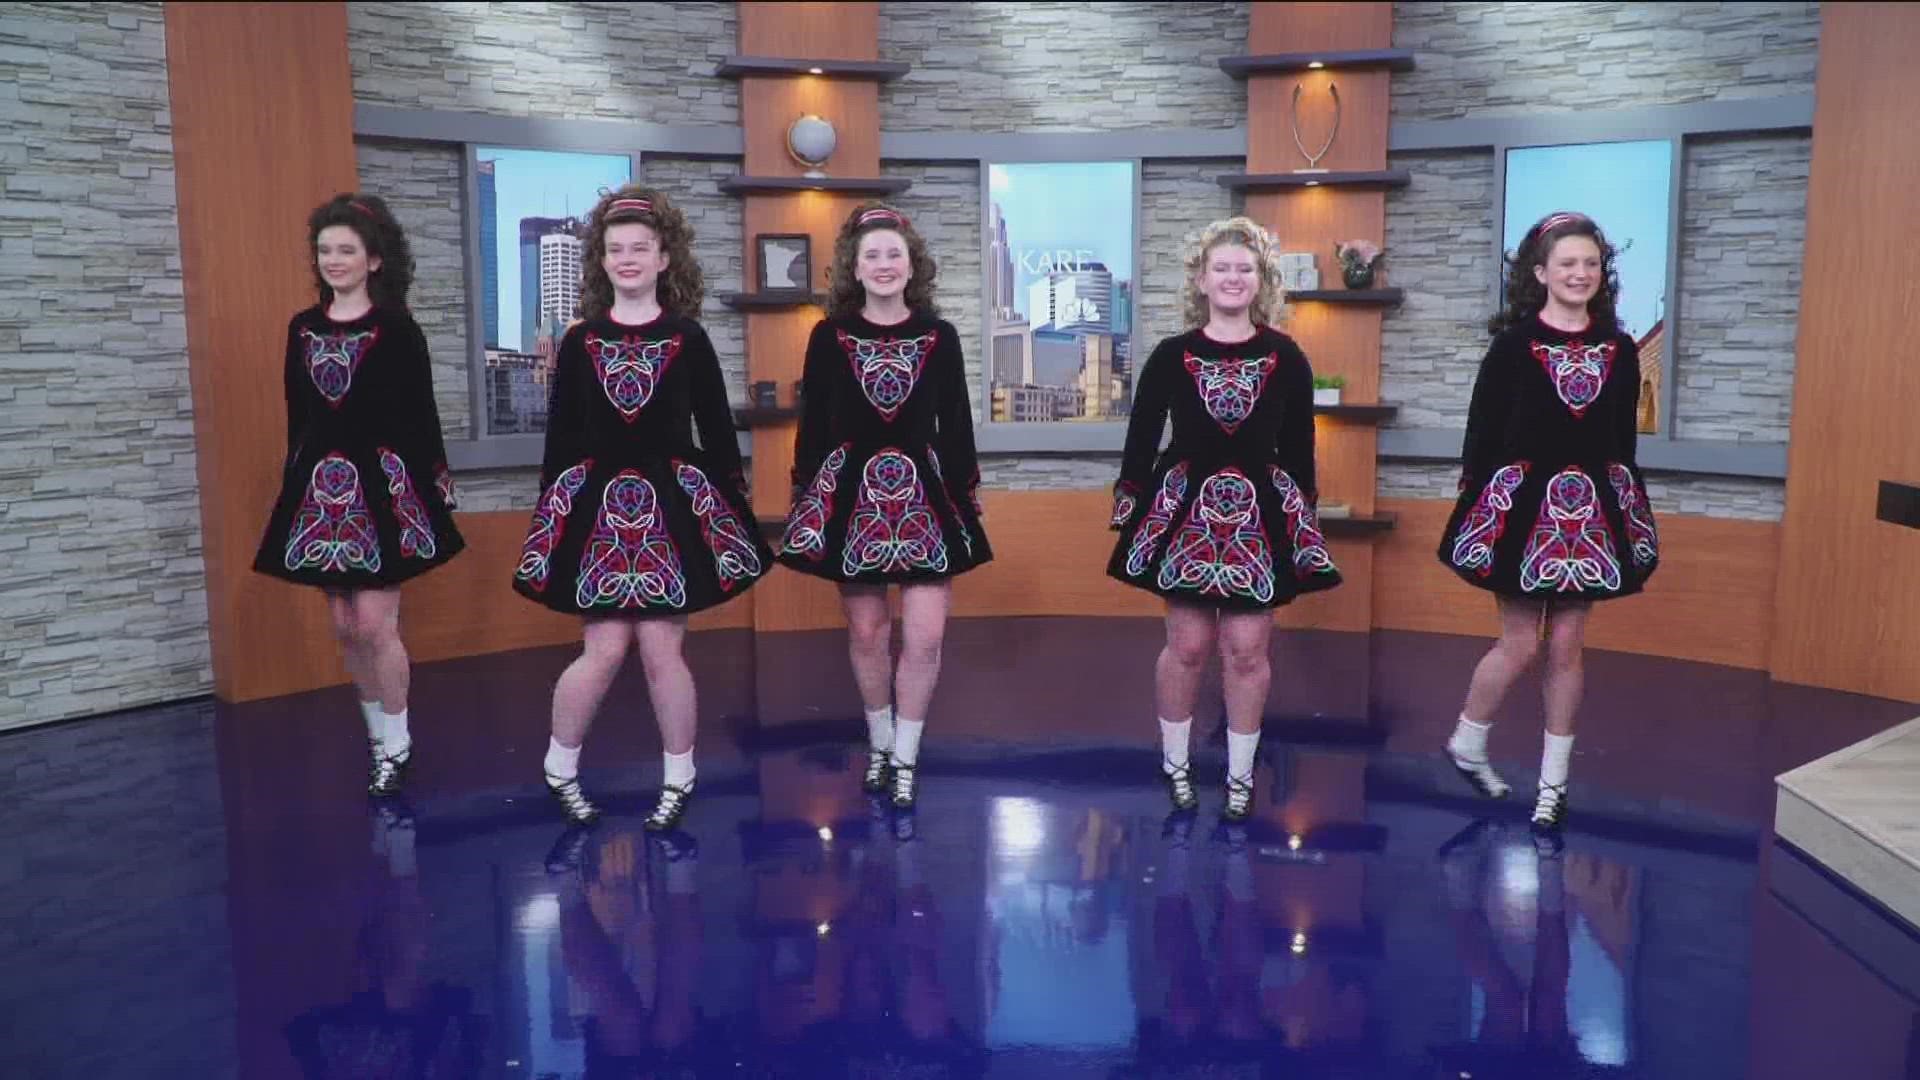 Some Irish dancers joined the KARE 11 Sunrise crew in the studio on Friday morning.